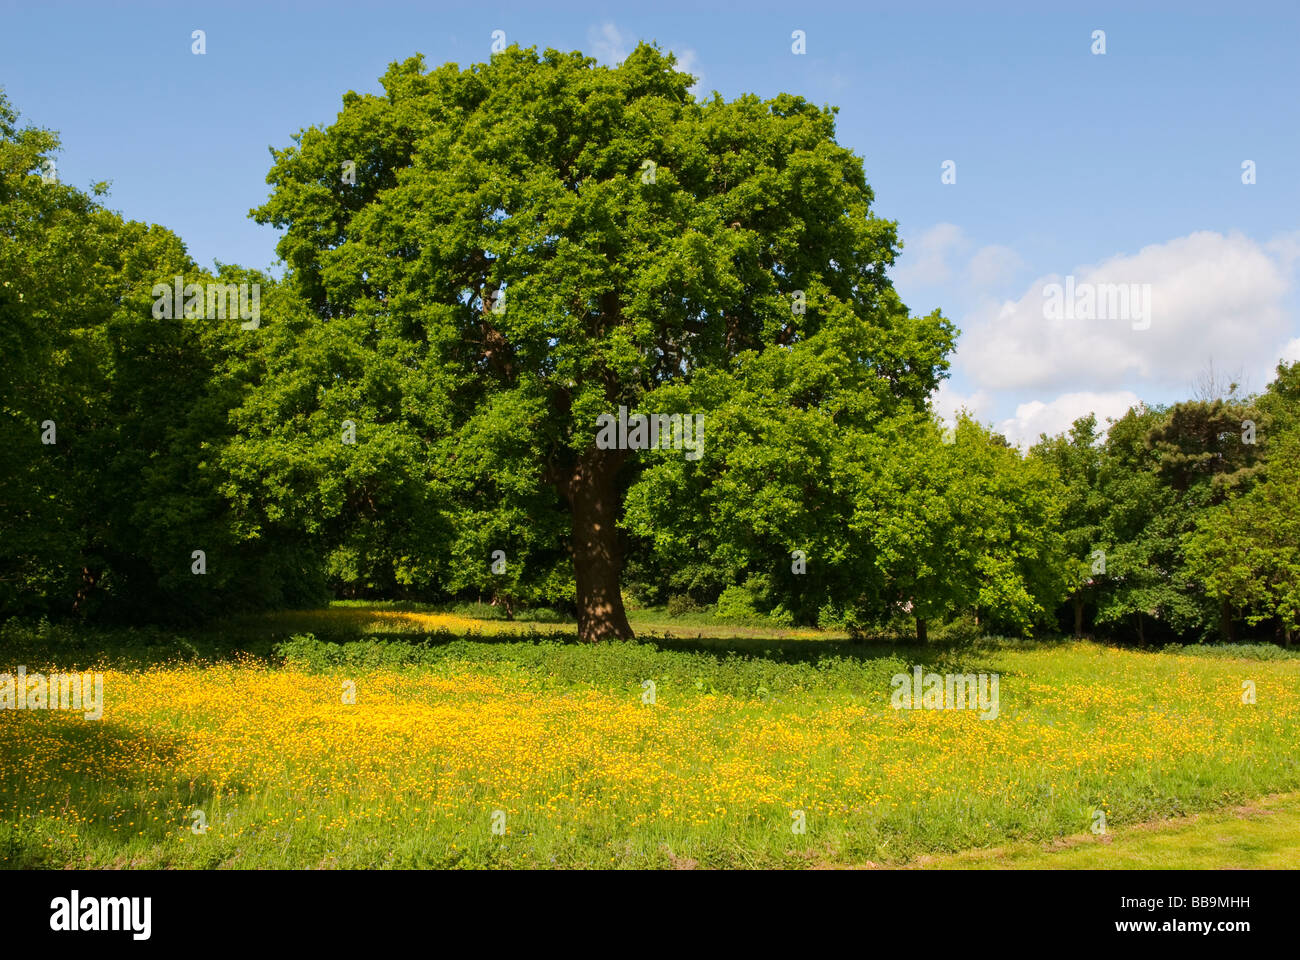 An oak tree in spring in a meadow full of buttercups and a blue sky background Stock Photo